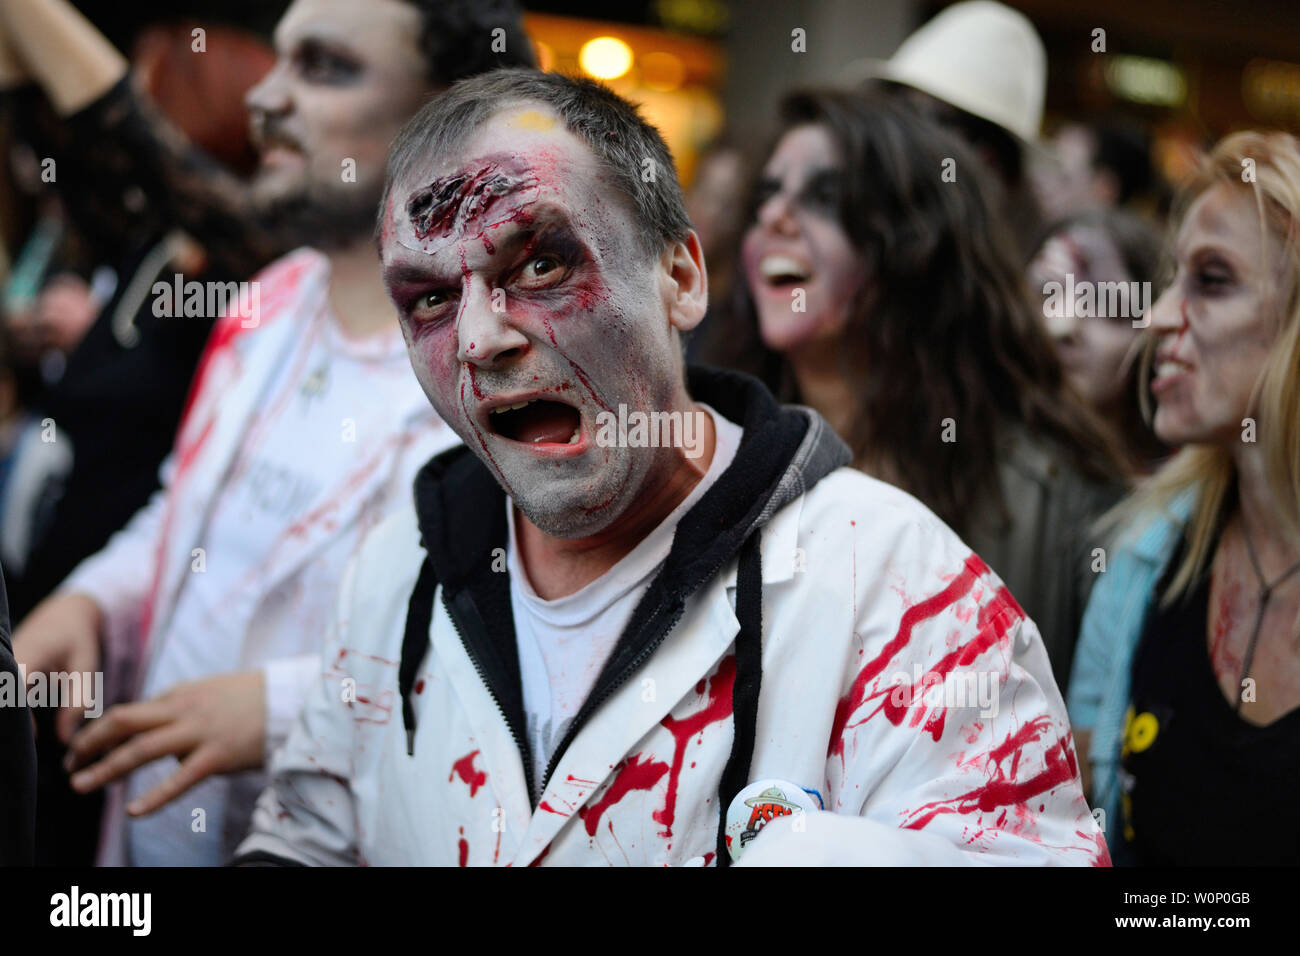 Belgrade, Serbia - October 19, 2013: People masked as zombies parades on streets during a zombie walk. Zombie walk is organized before Serbian SF movi Stock Photo